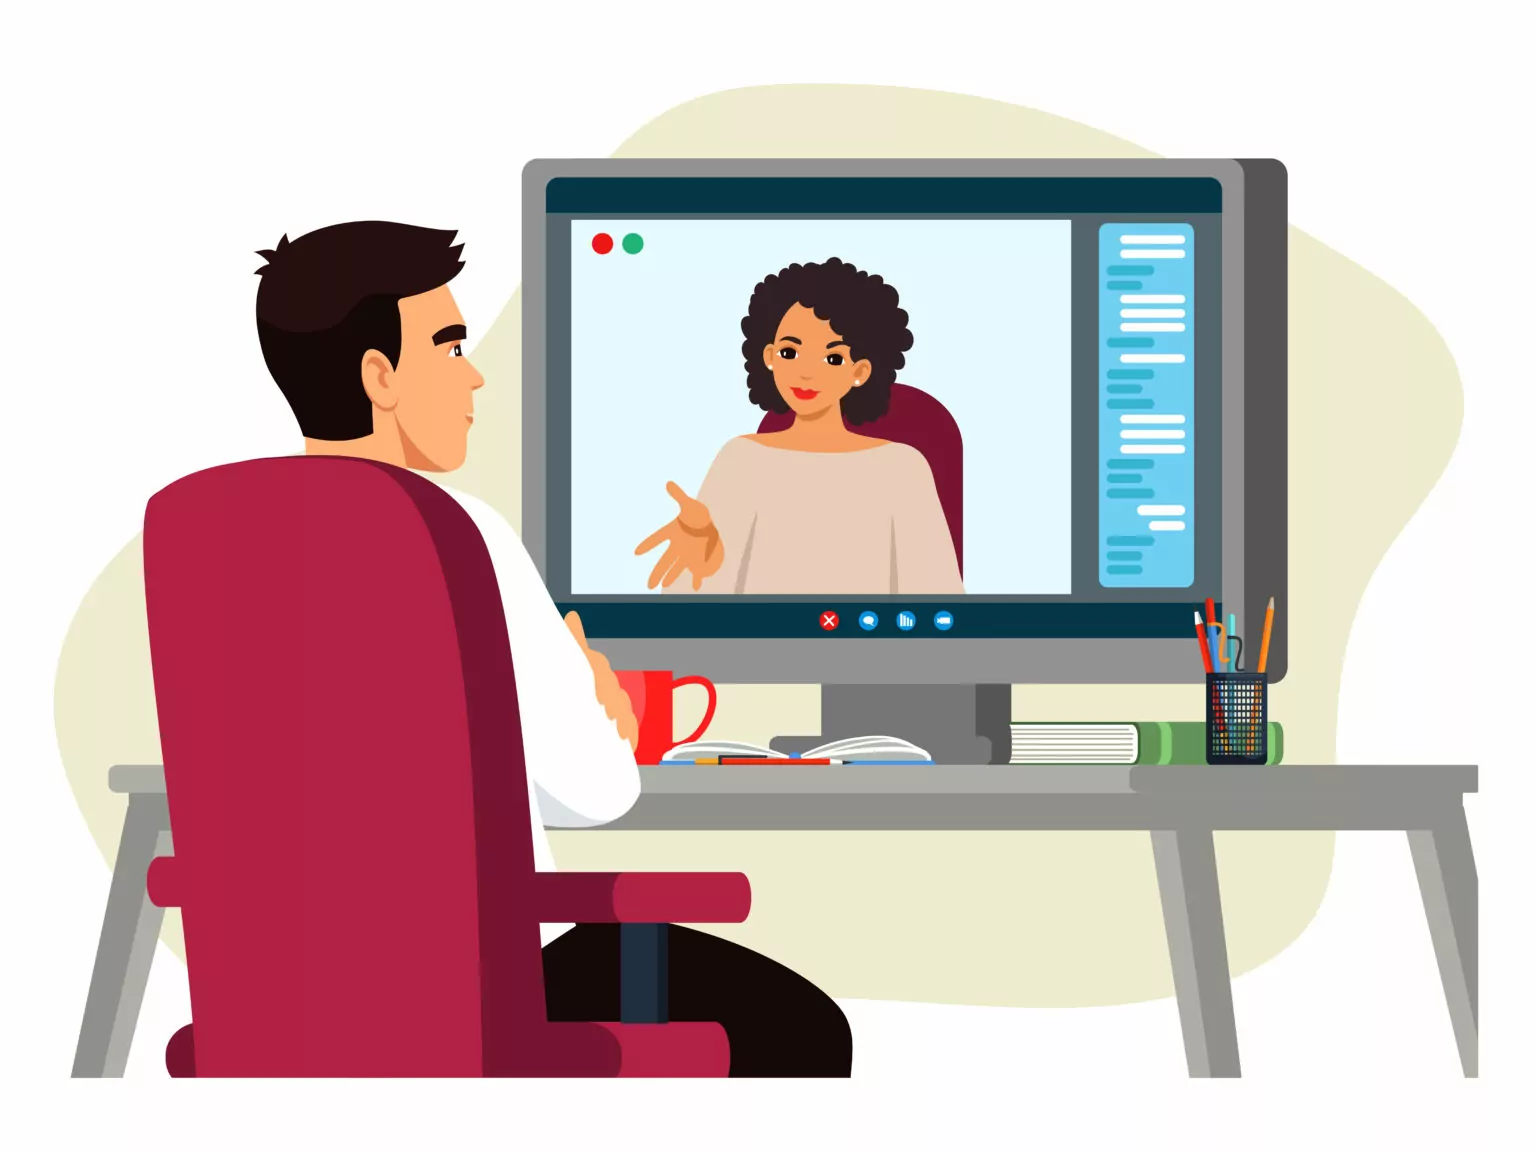 Woman and man talking at online video call, communication via computer screen illustration. Workers talking on videoconference with cup and books, virtual digital meeting.